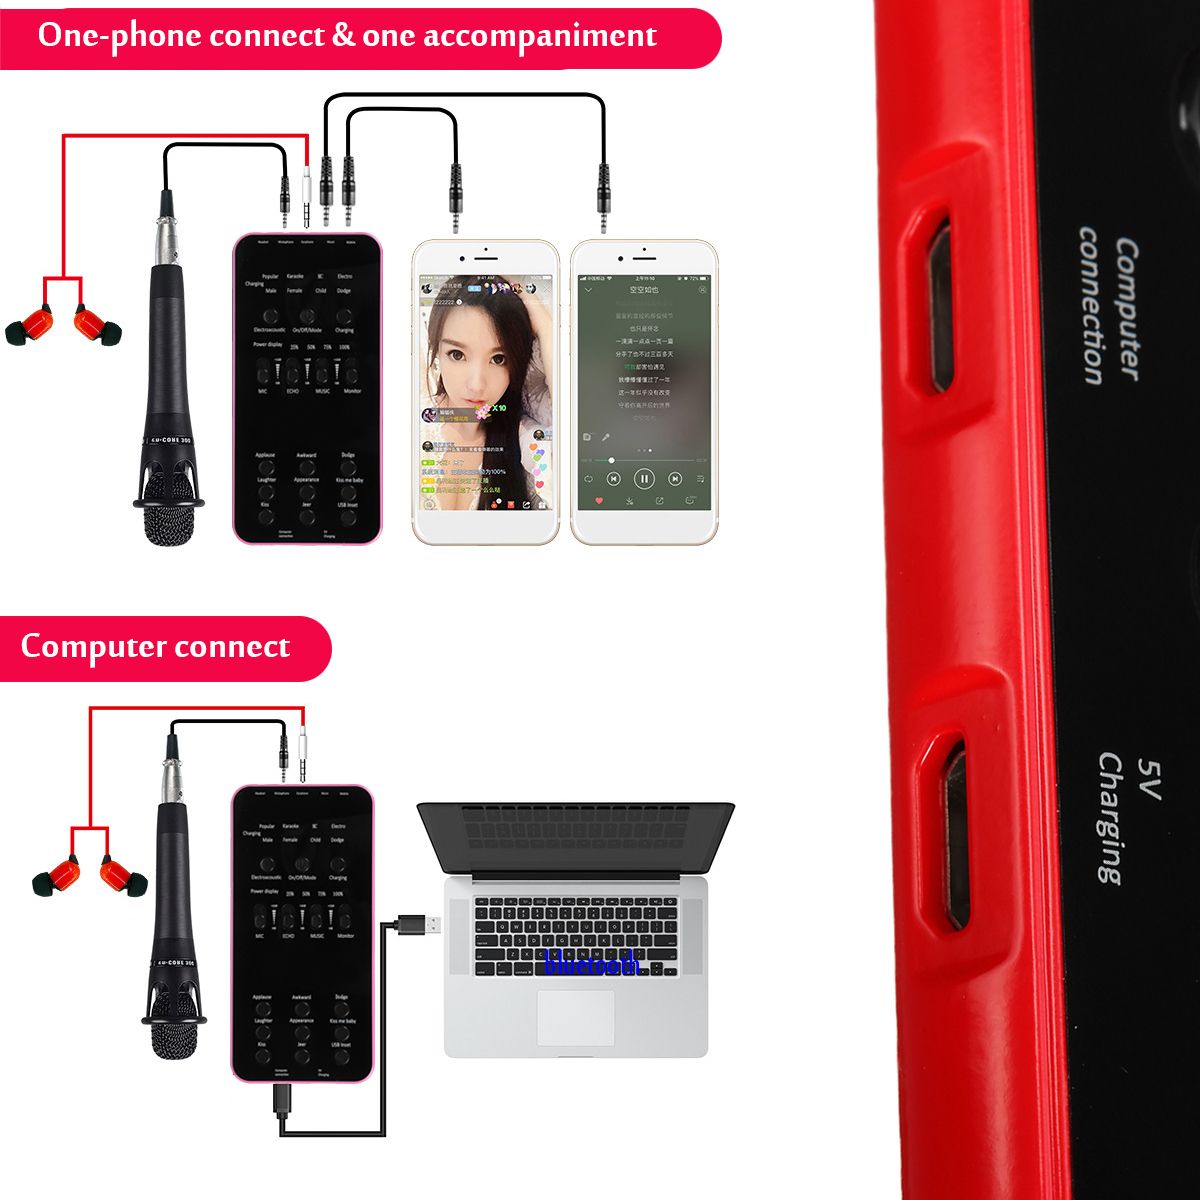 Portable-bluetooth-Live-Sound-Card-Webcast-Headset-Mic-Voice-Control-Support-Phone-Computer-for-Kara-1717699